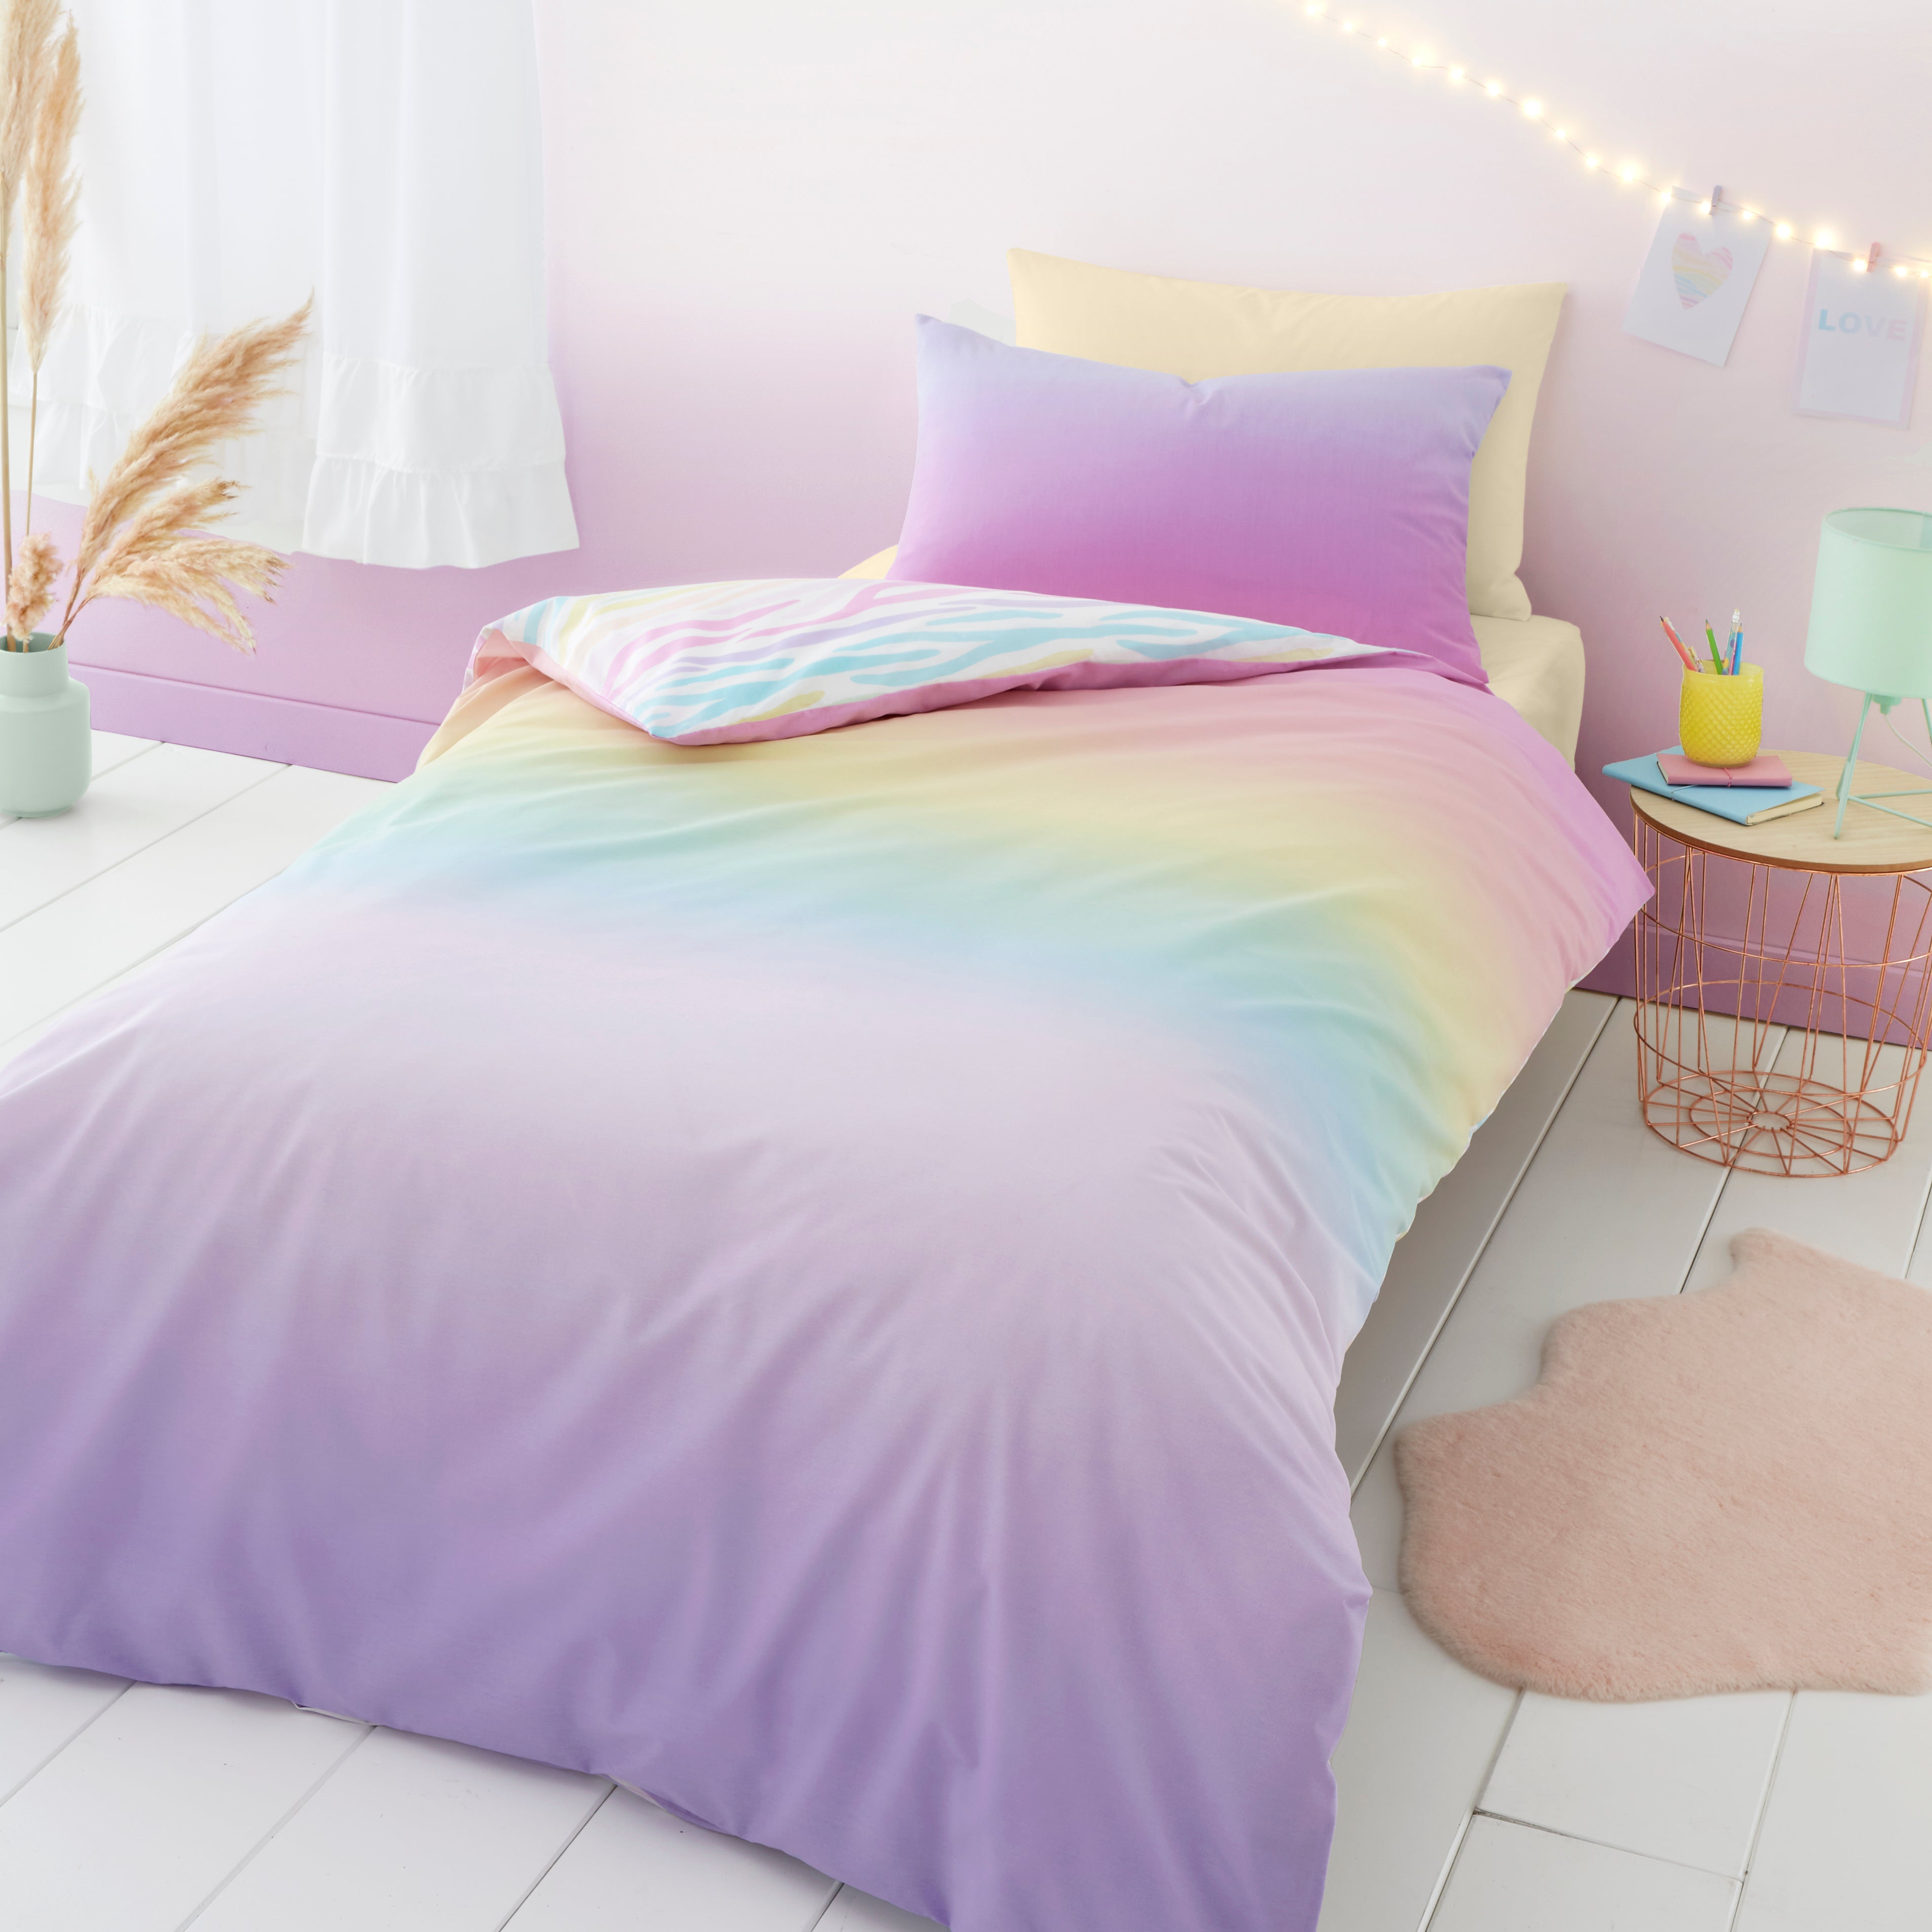 Rainbow Ombre Duvet Cover and Pillowcase Set